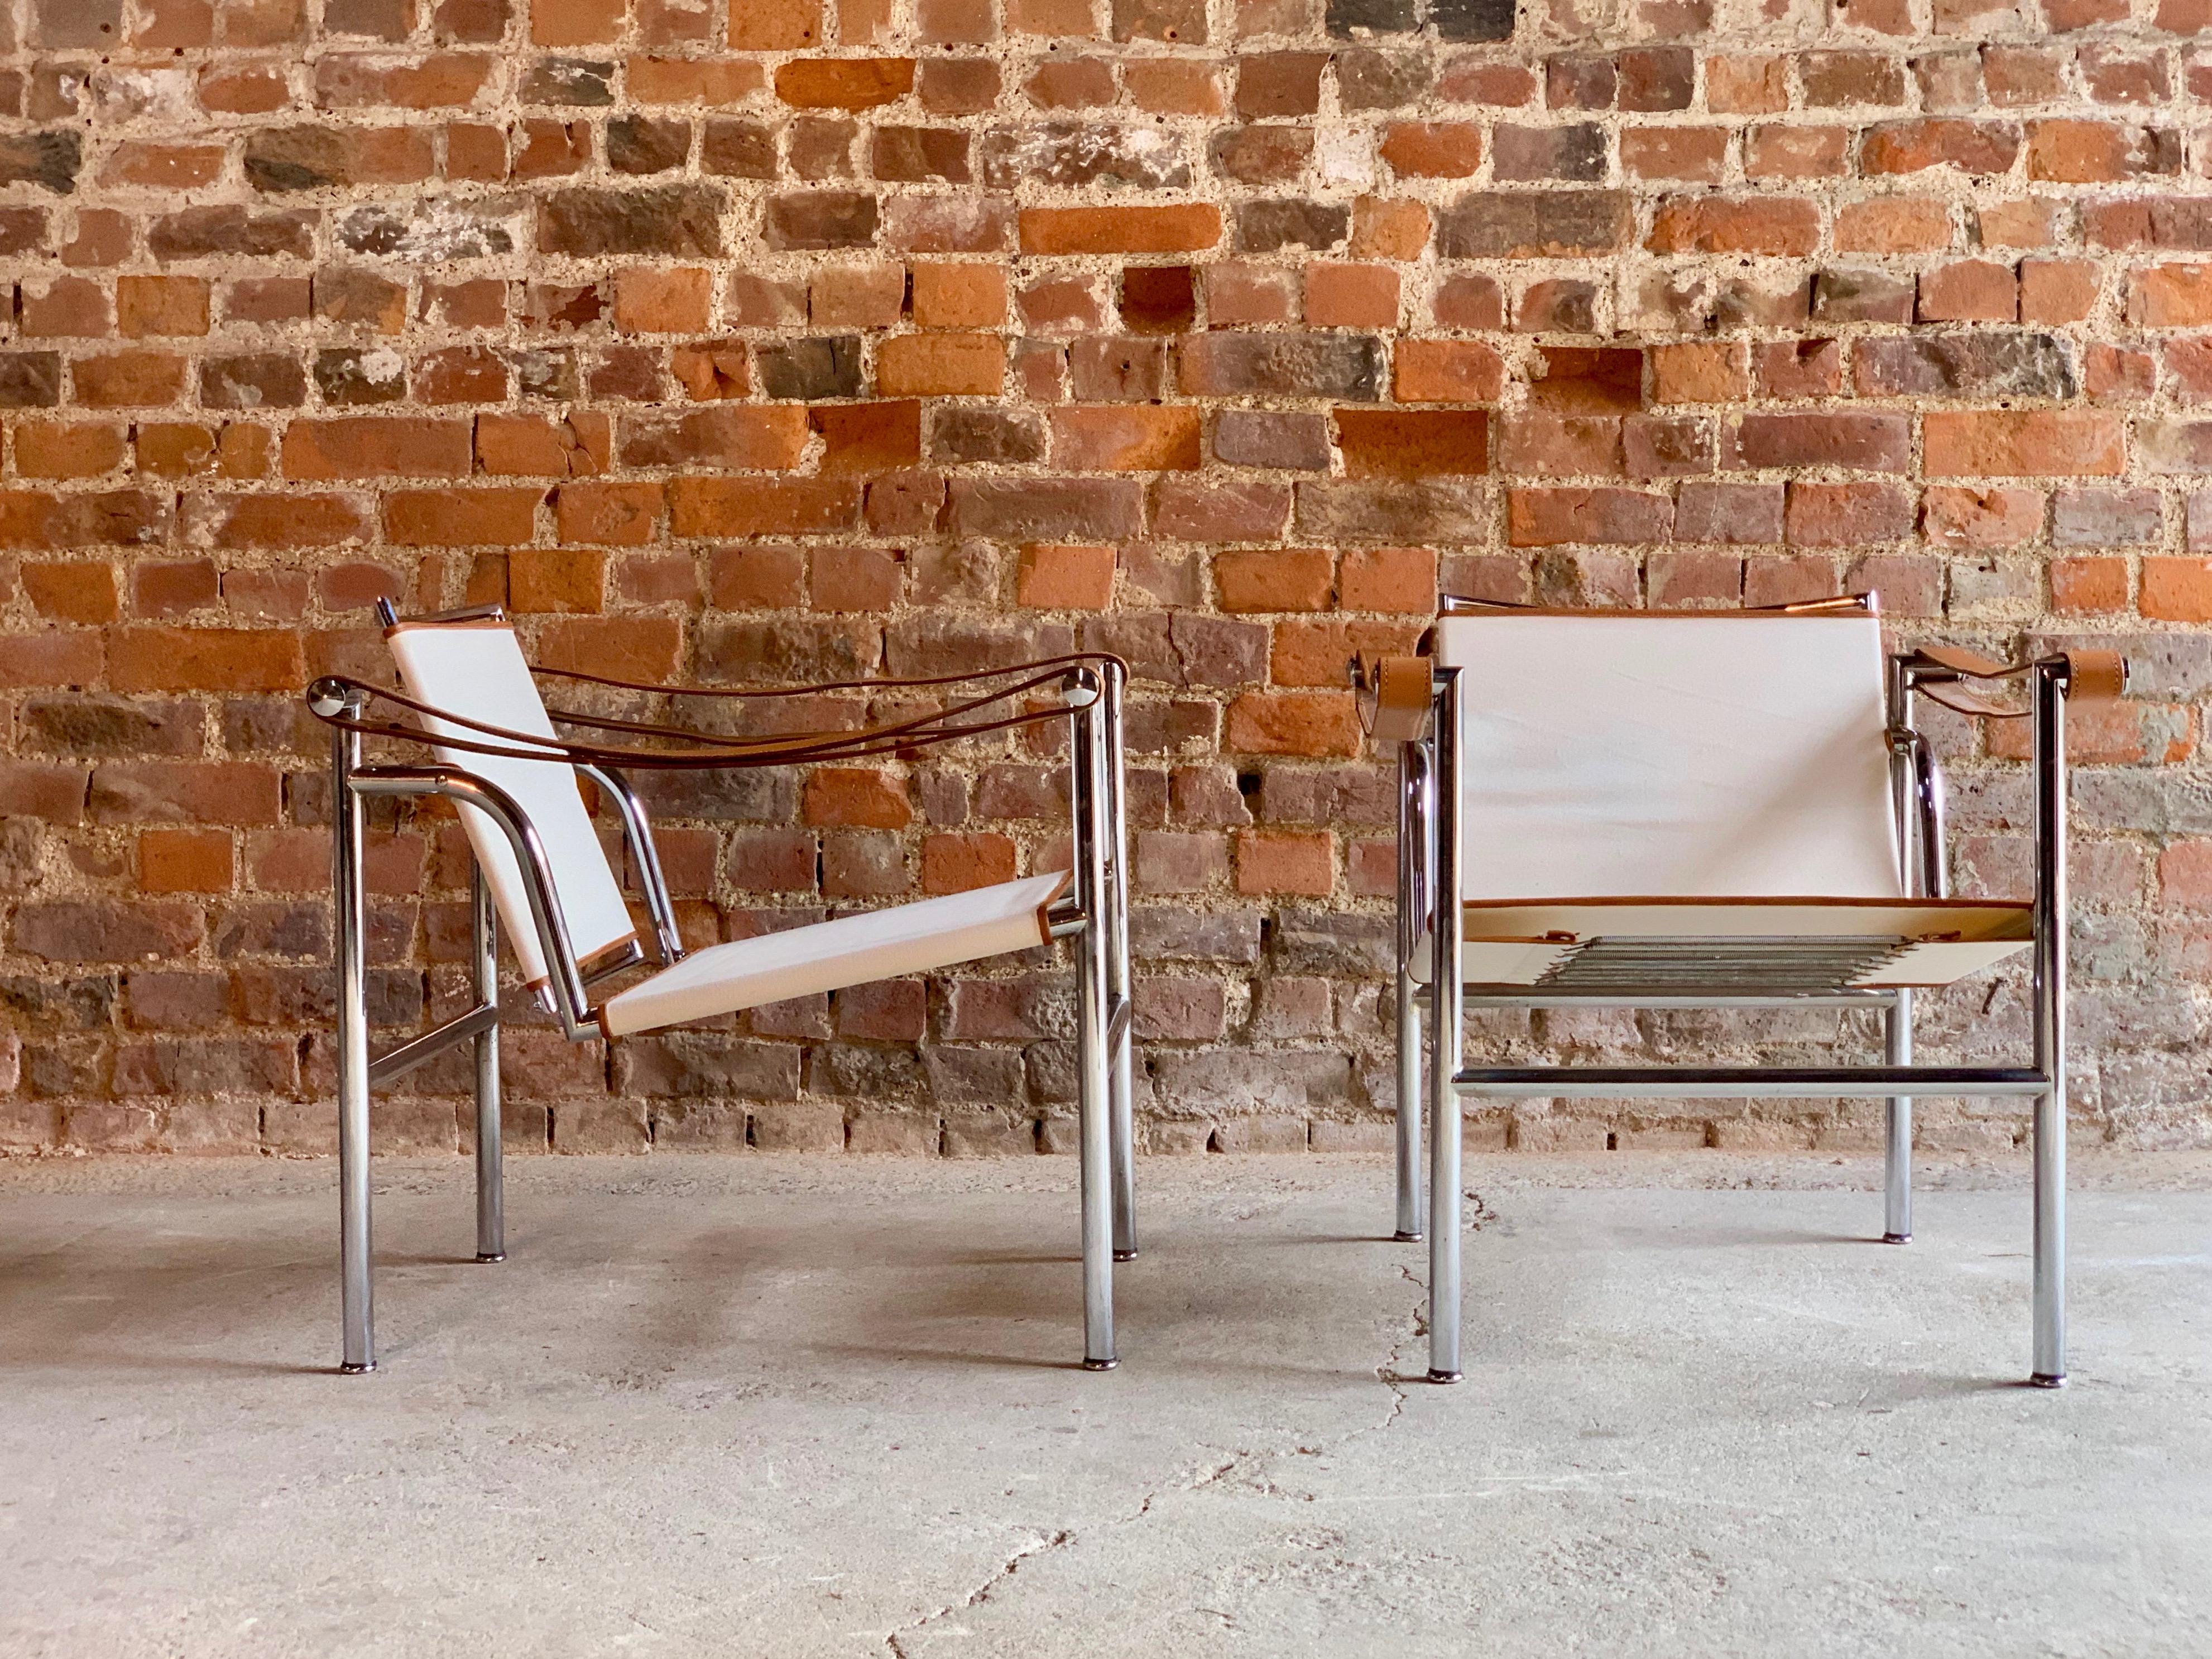 Le Corbusier LC1 Basculant chairs Charlotte Perriand and Pierre Jeanneret Cassina, circa 1970

Stunning pair of original LC1 Basculant armchairs by Le Corbusier, Pierre Jeanneret, & Charlotte Perriand Italy, circa 1970, on chrome tubular frames